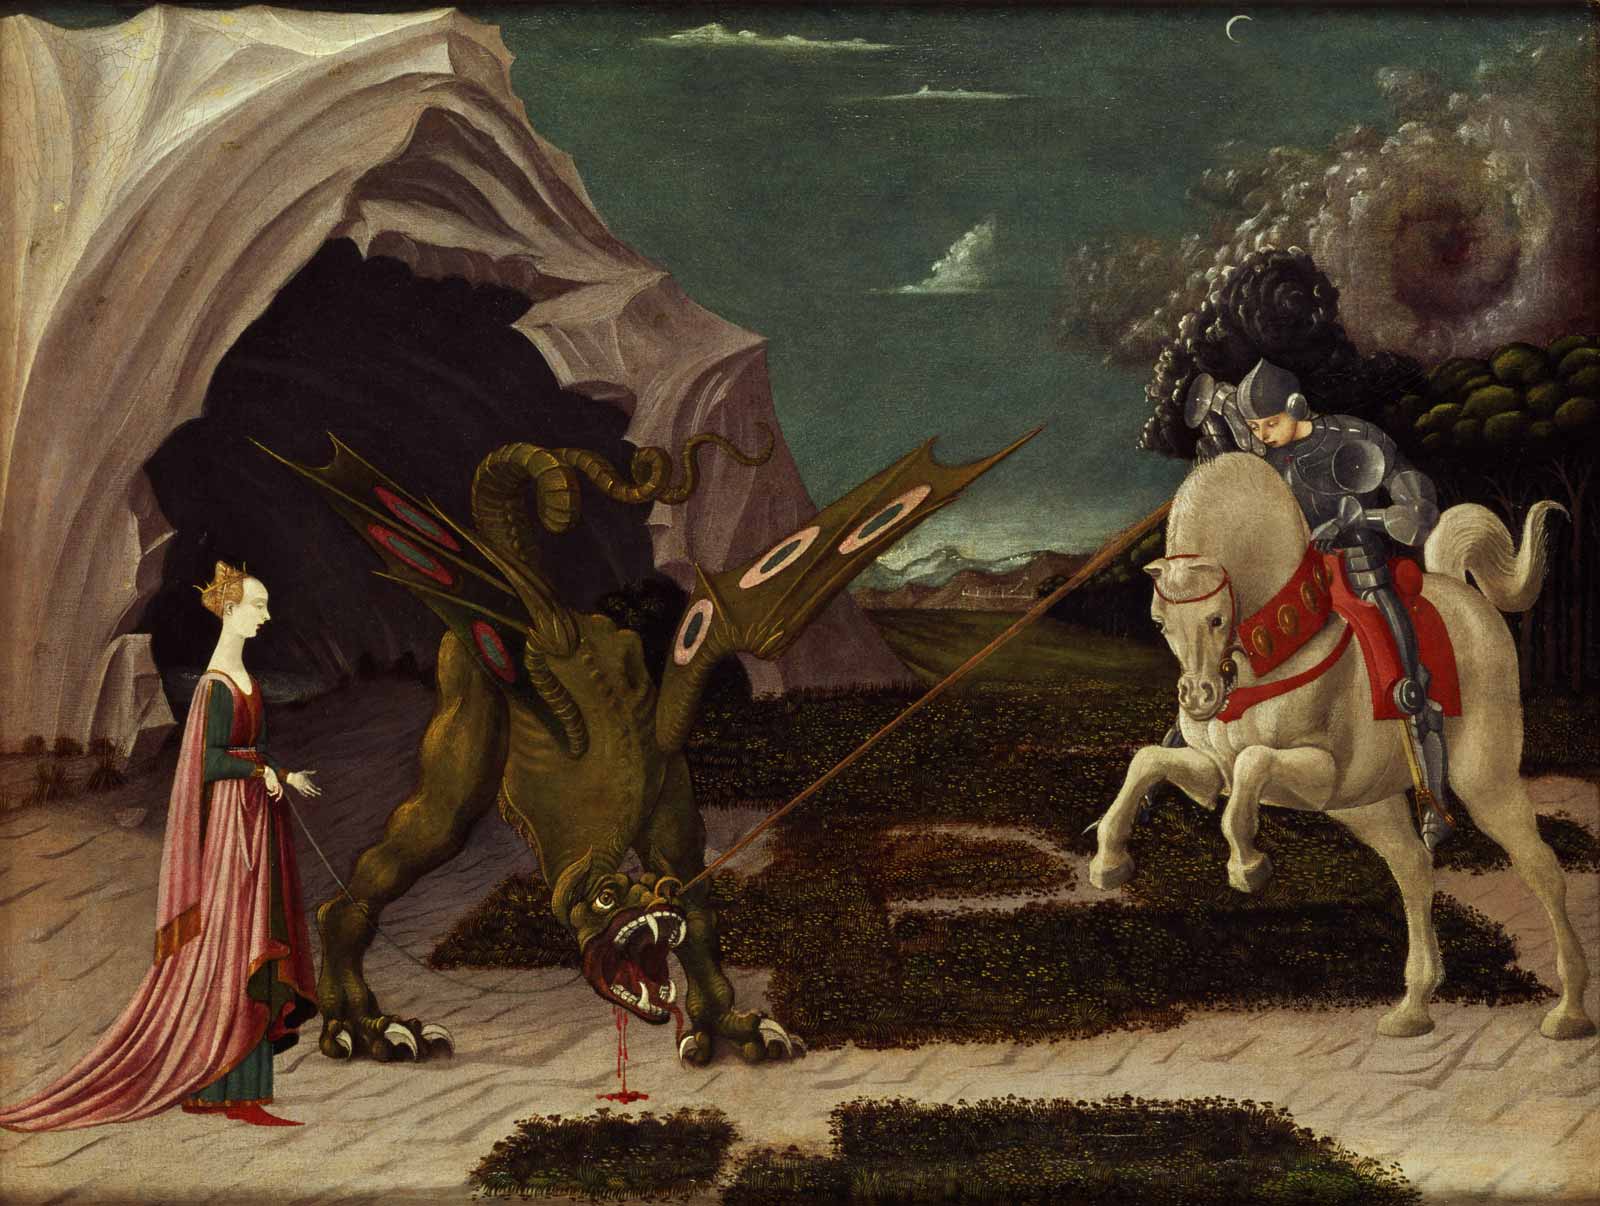 Paolo Uccello: St. George and the Dragon, circa 1470